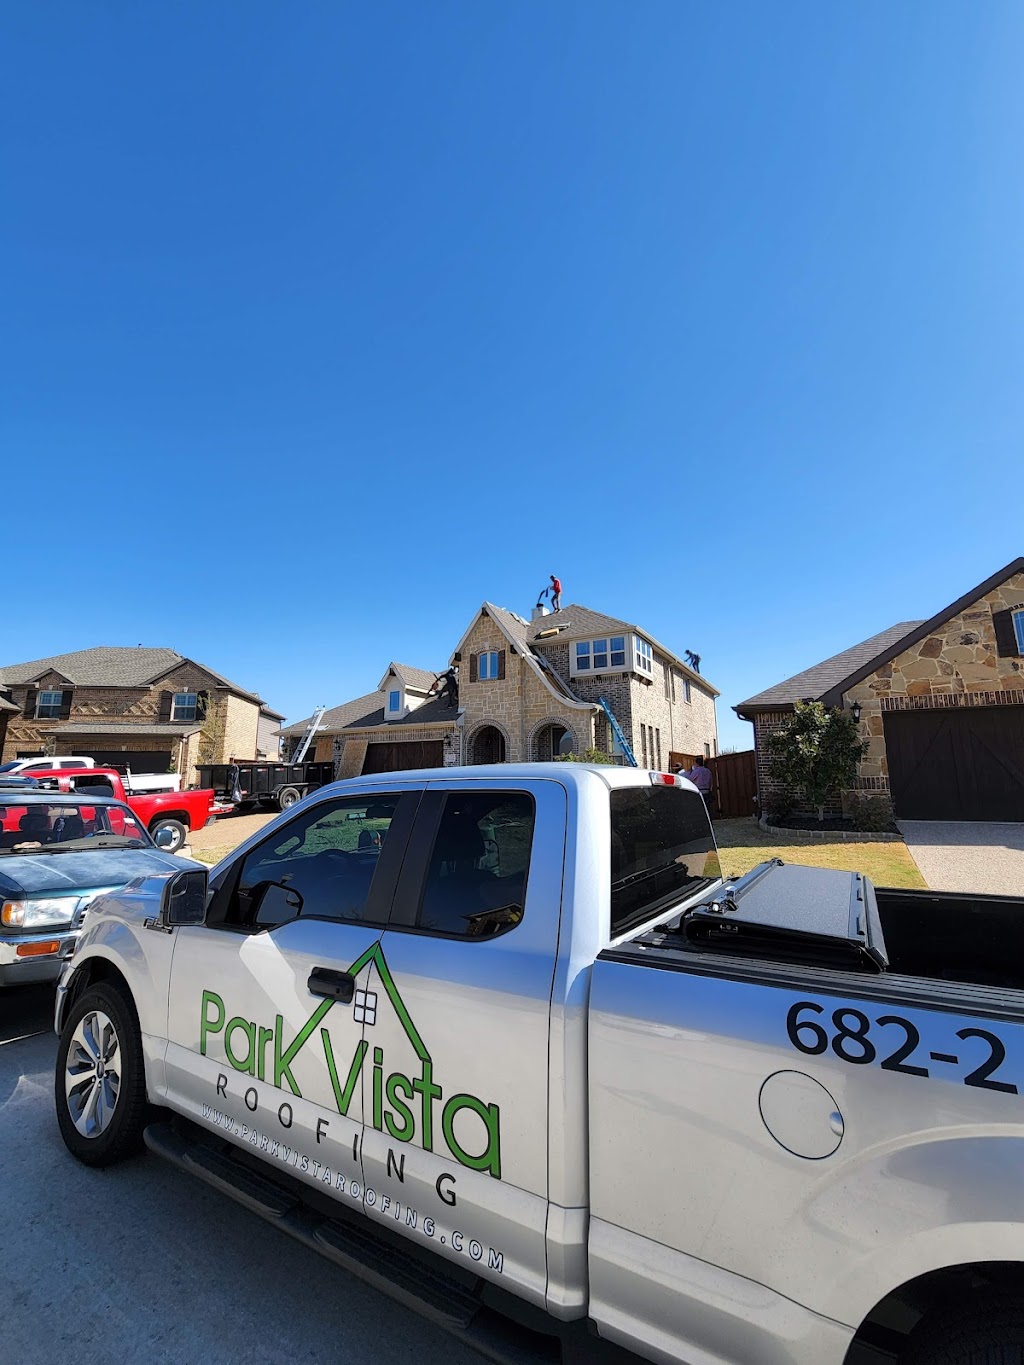 Park Vista Roofing | 9500 Feather Grass Ln Suite 120 #142, Fort Worth, TX 76177, USA | Phone: (682) 214-7533